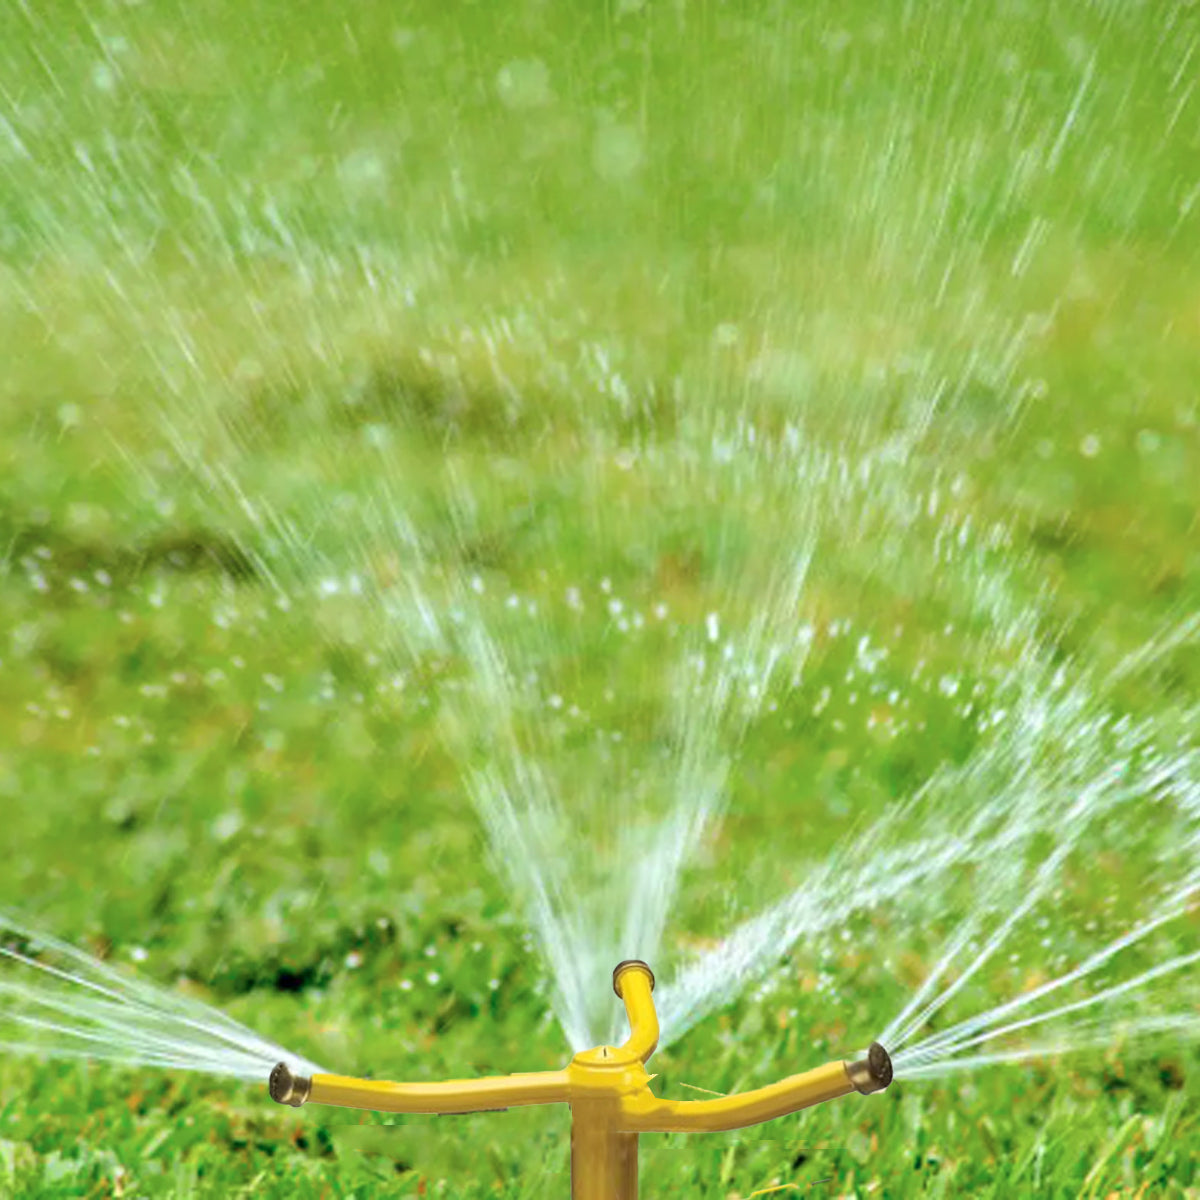 Nelson Whirling Sprinkler For Lawn & Garden – Up To 35Ft Coverage